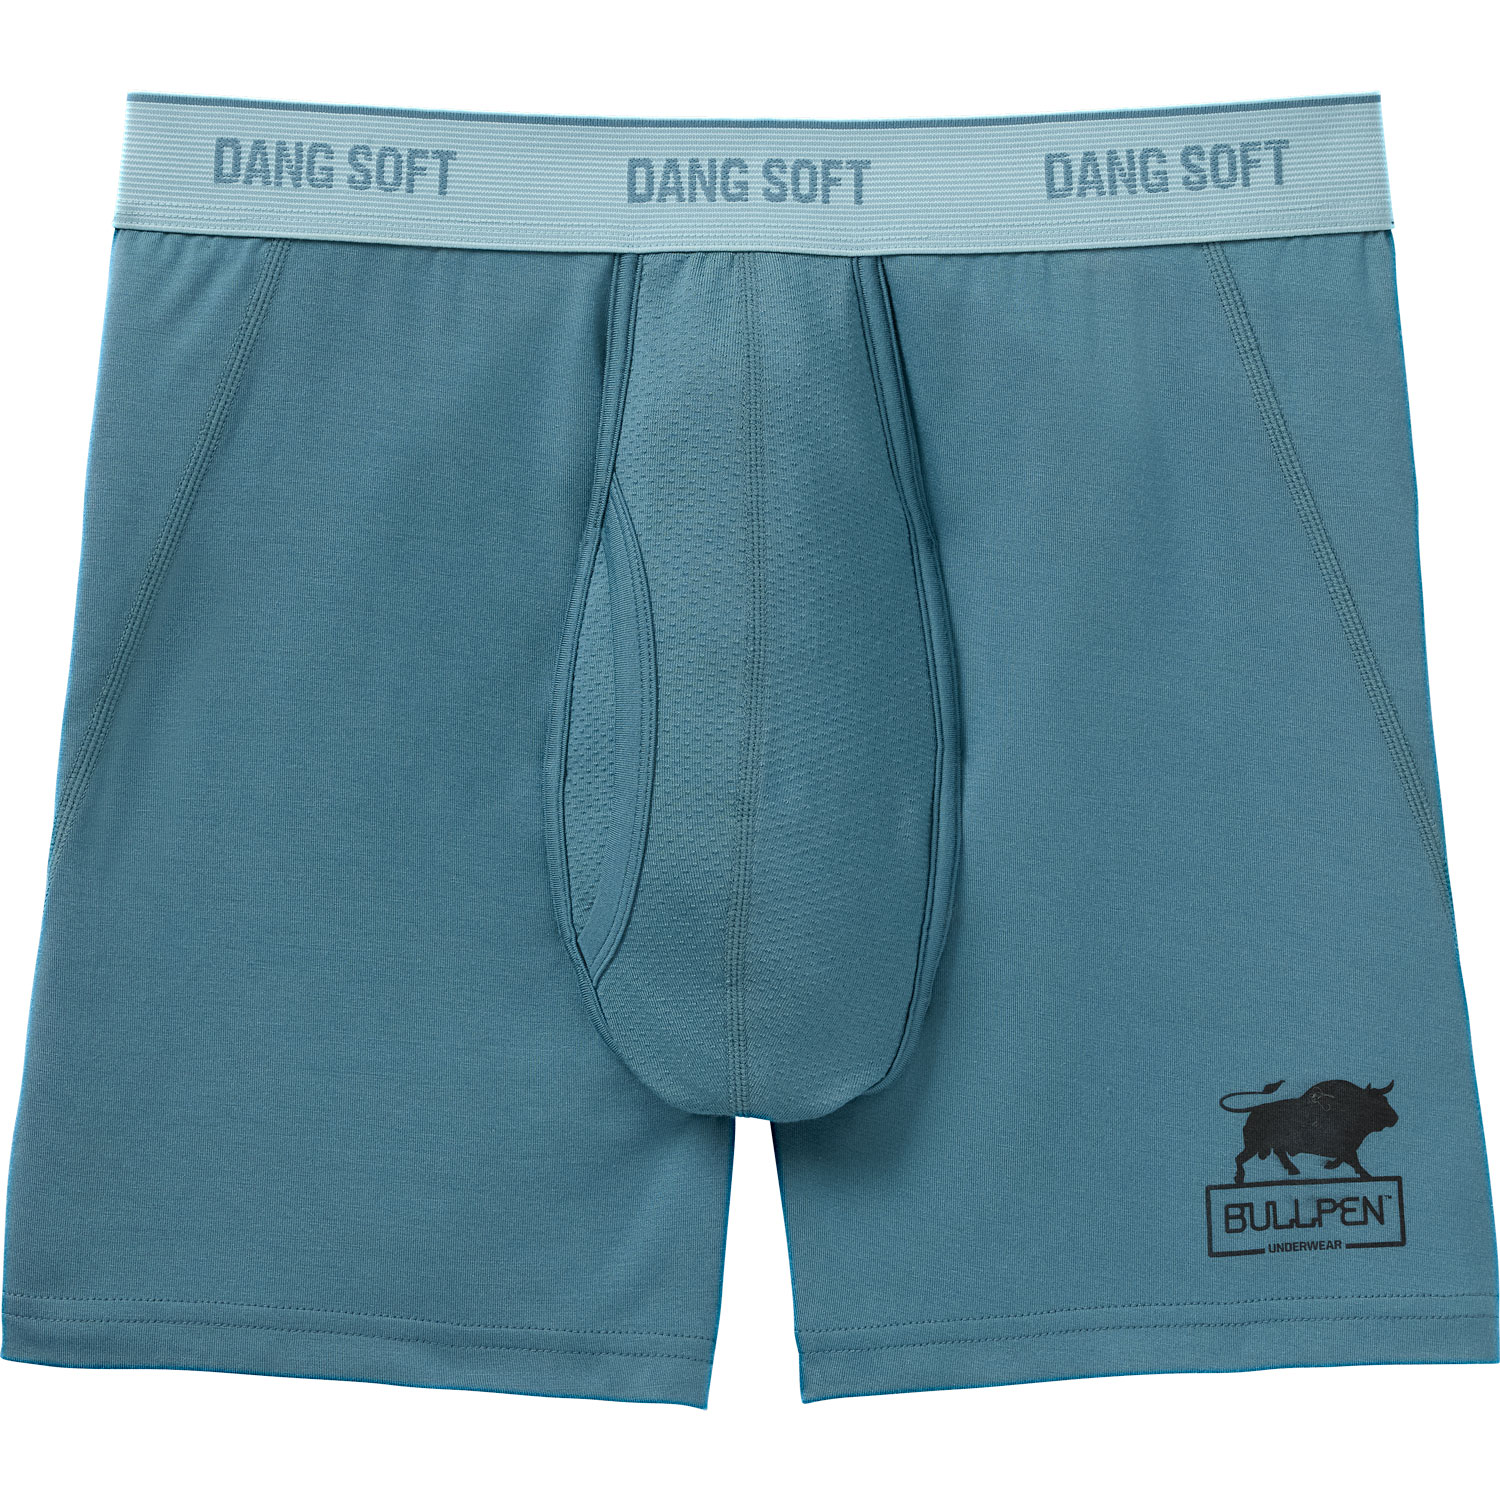 Duluth Trading Co Dang Soft Underwear Boxer Brief Clouds 11701